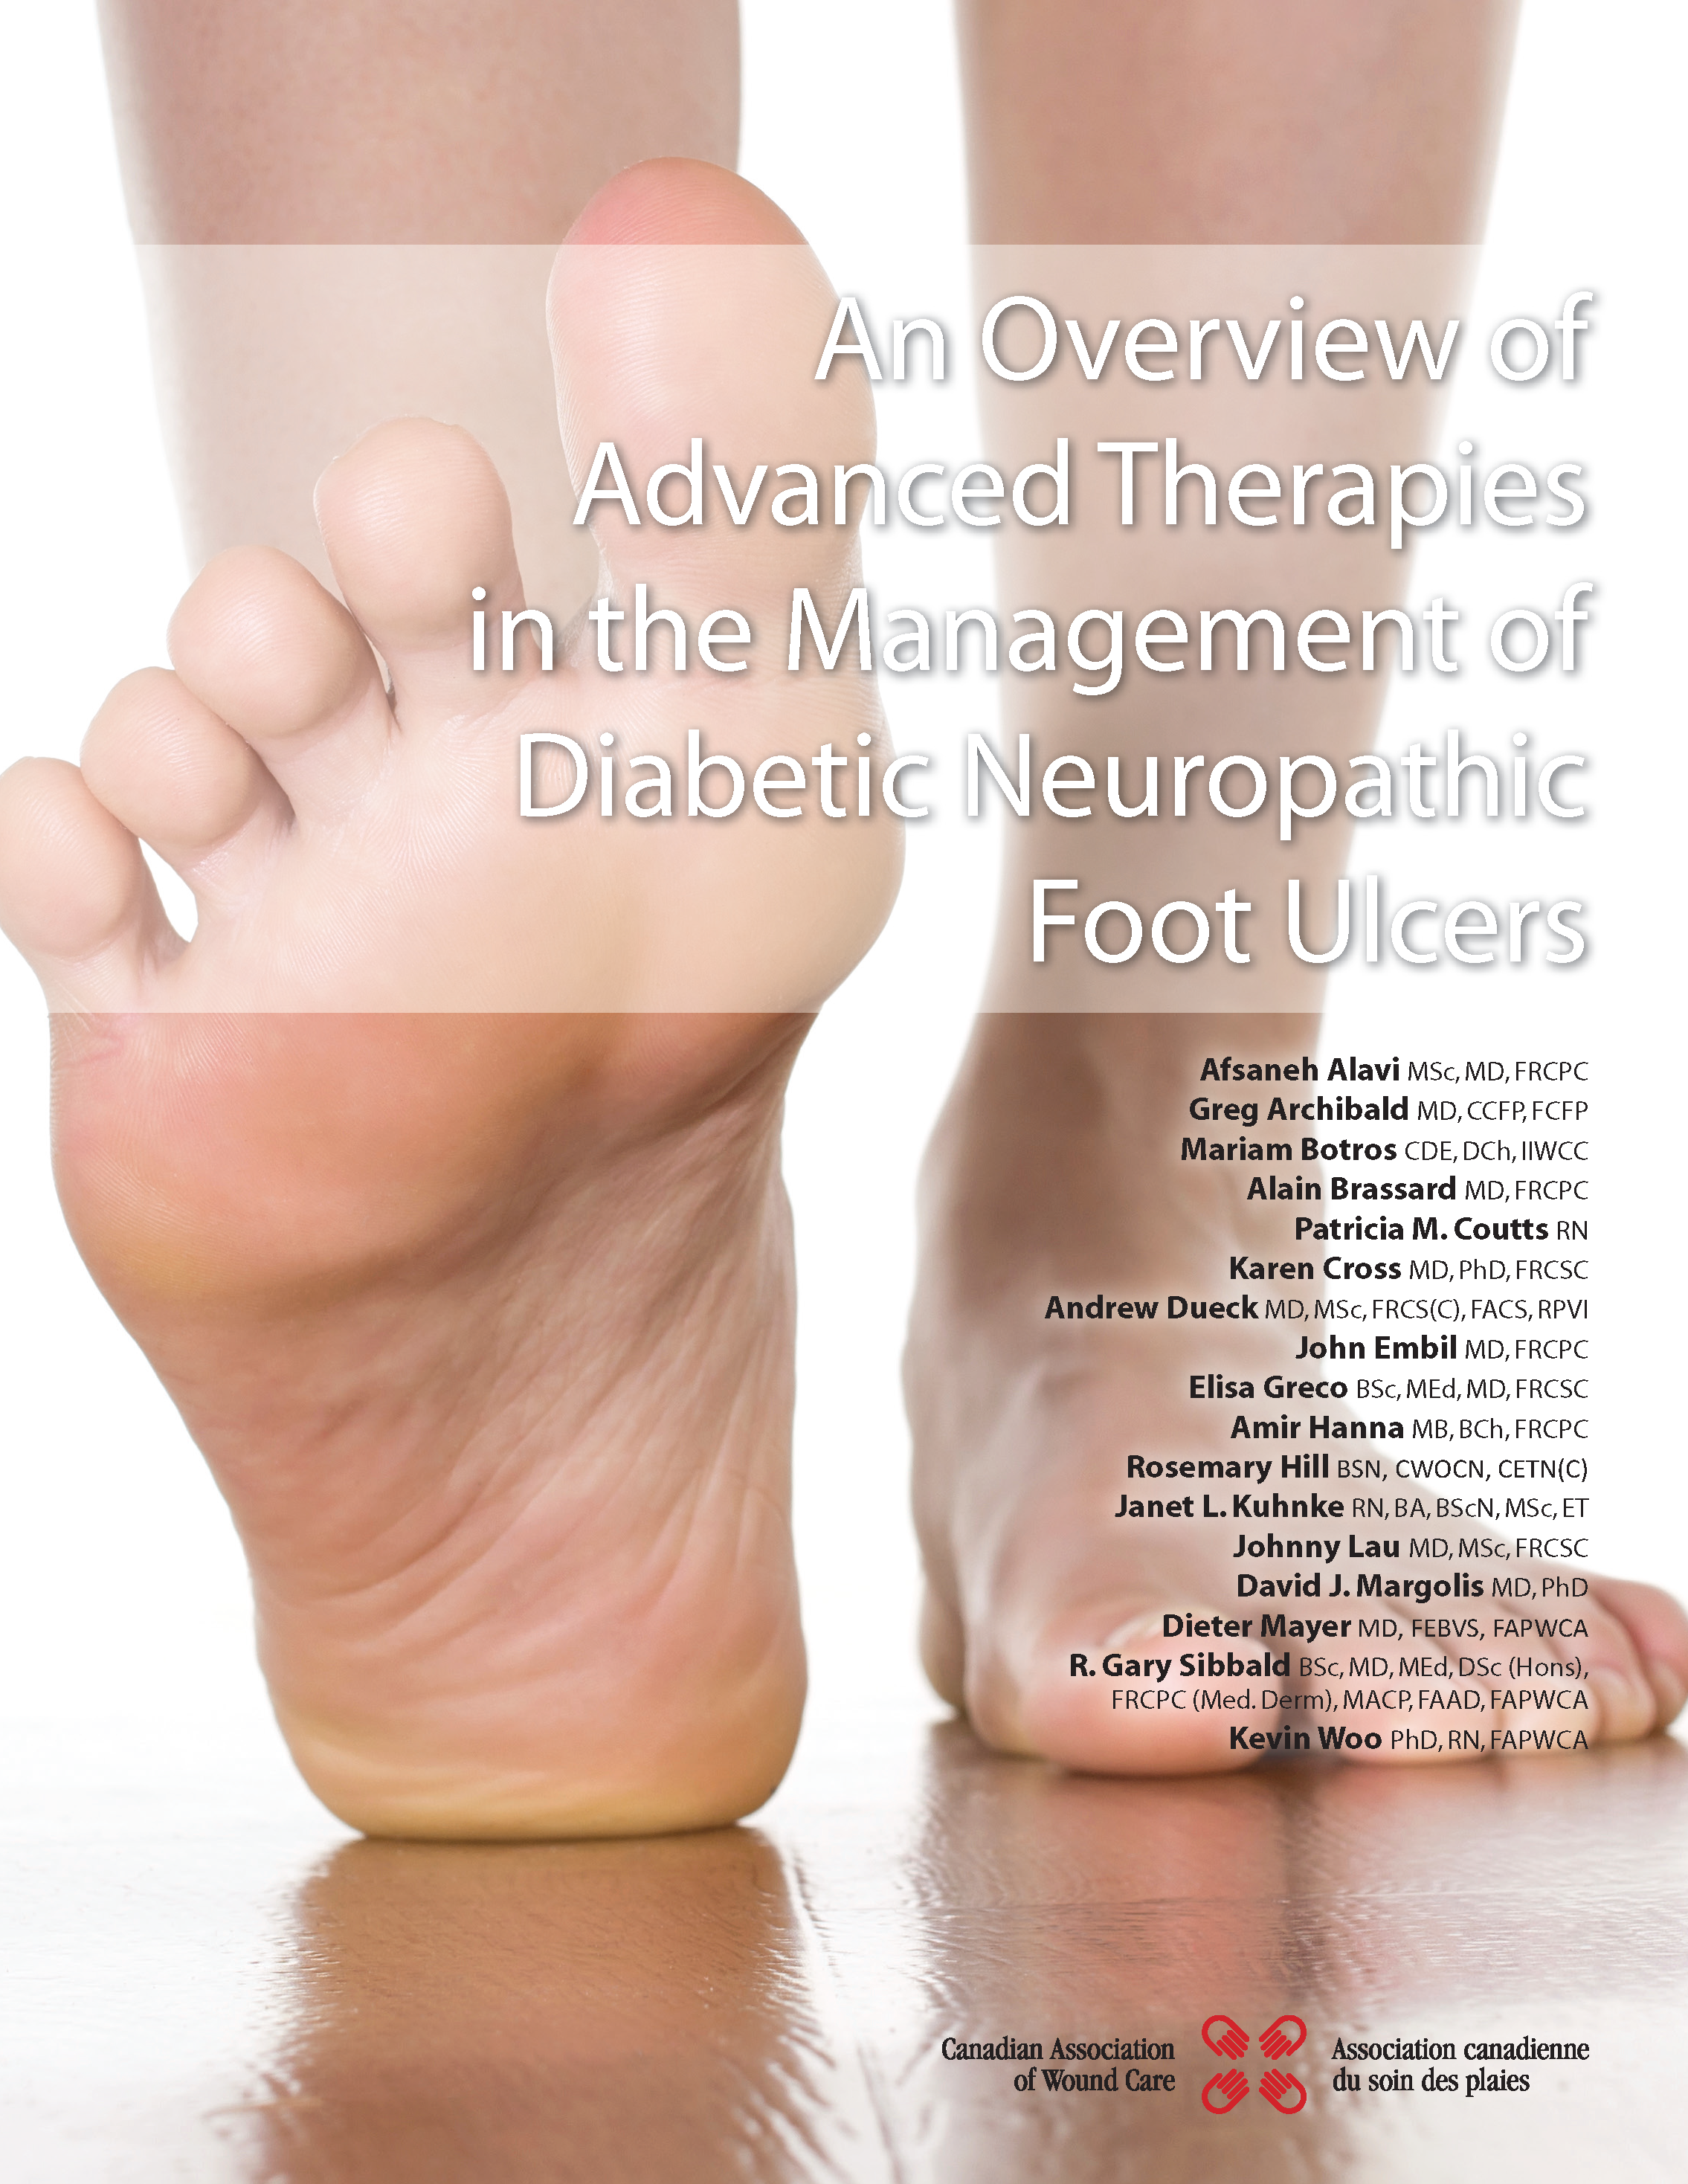 An Overview of Advanced Therapies in the Management of Diabetic Neuropathic Foot Ulcers